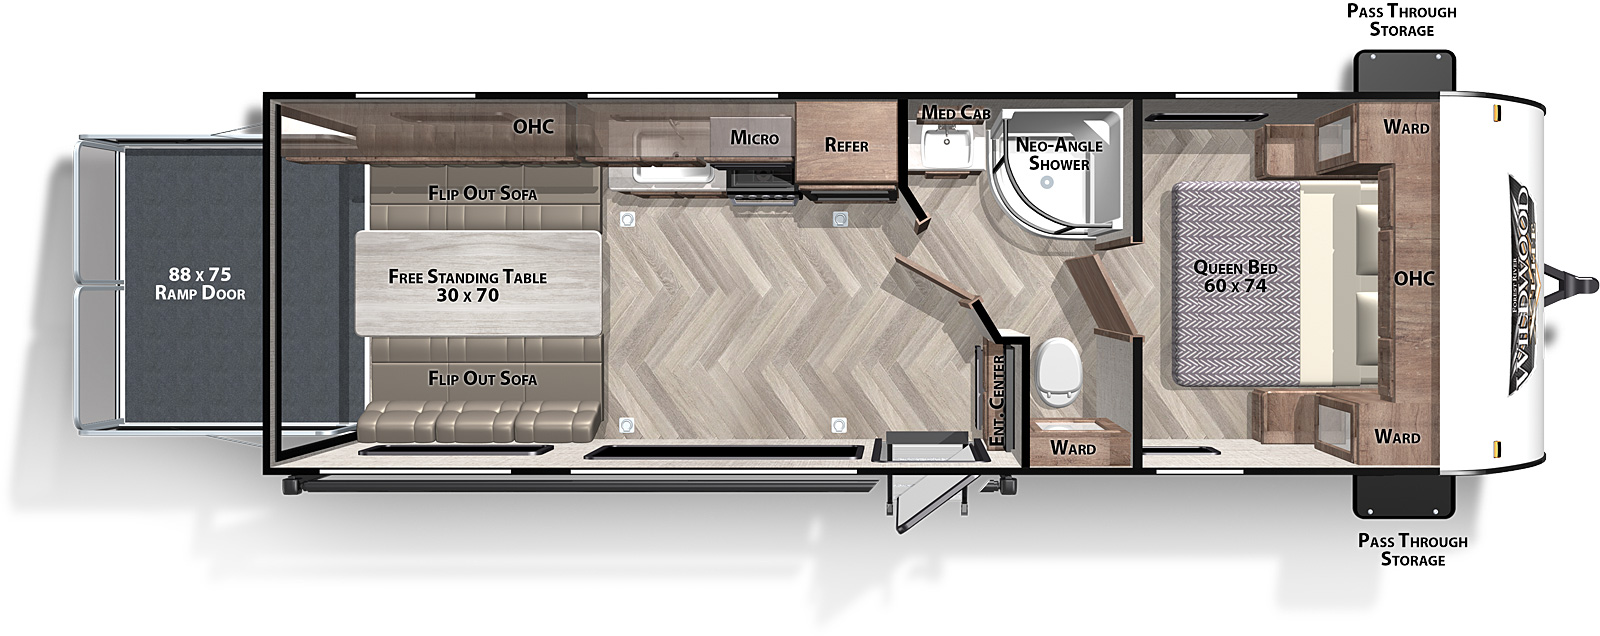 X-Lite Northwest 260RT floorplan. The 260RT has no slide outs and one entry door.